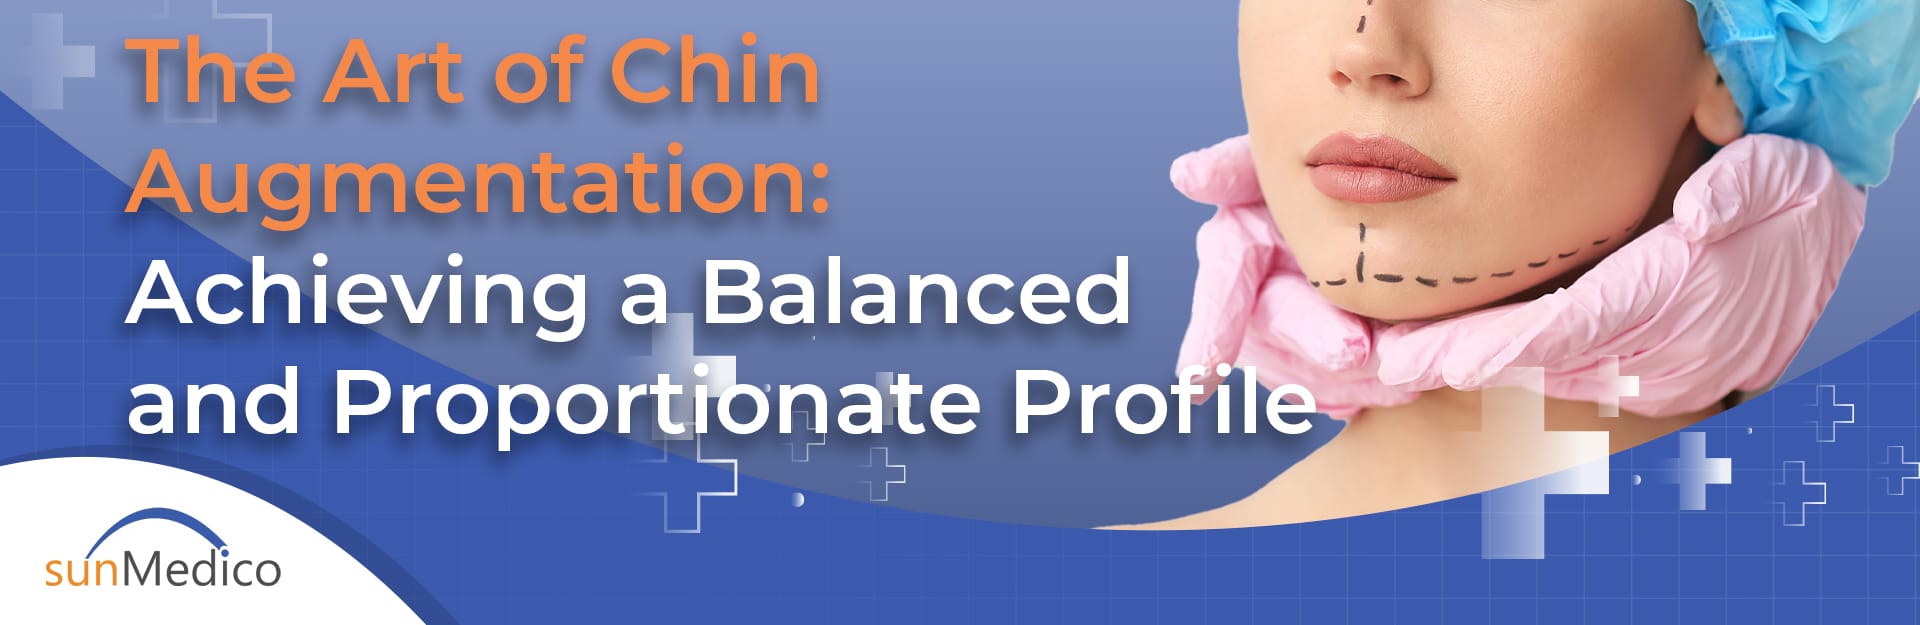 The Art of Chin Augmentation: Achieving a Balanced and Proportionate Profile